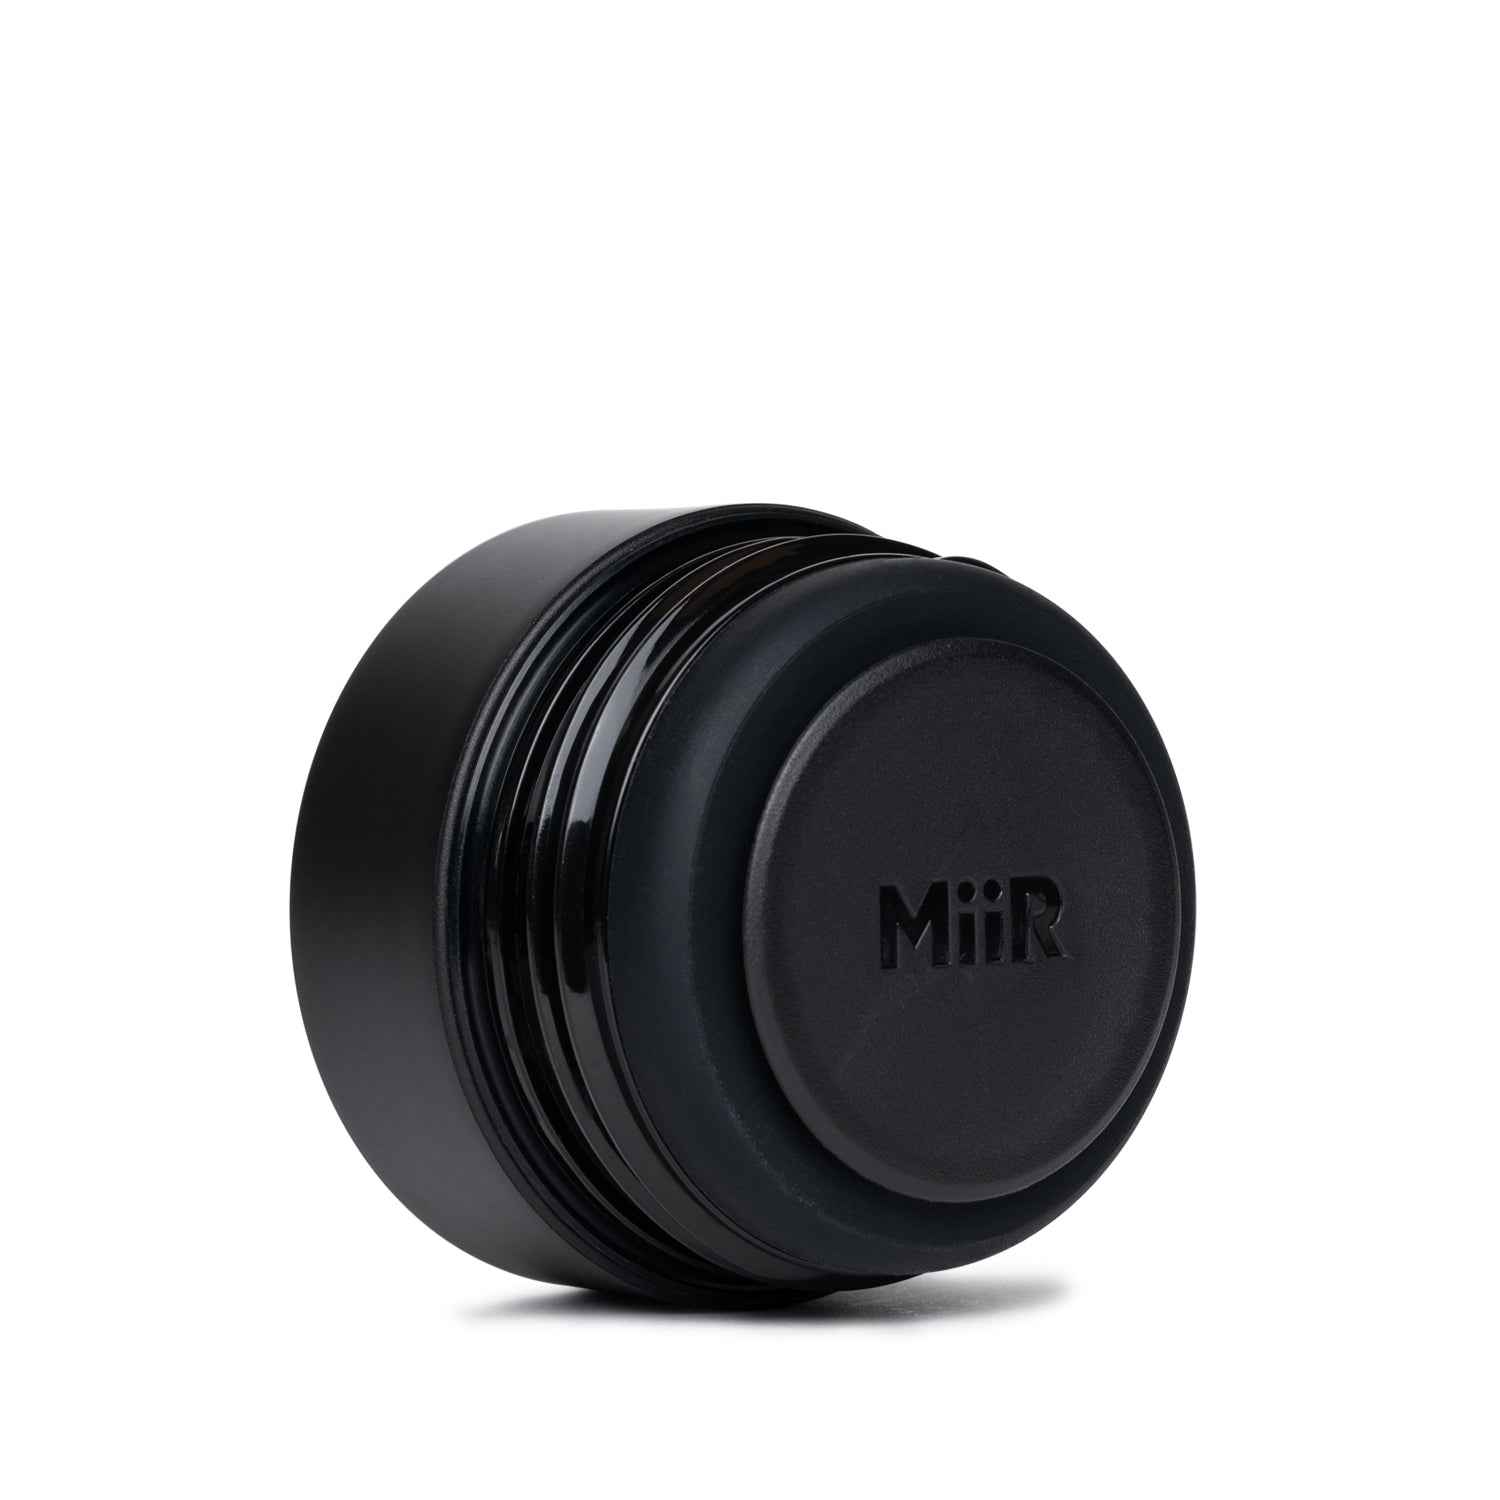 Your NEW MiiR Essentials  New Lids from MiiR –